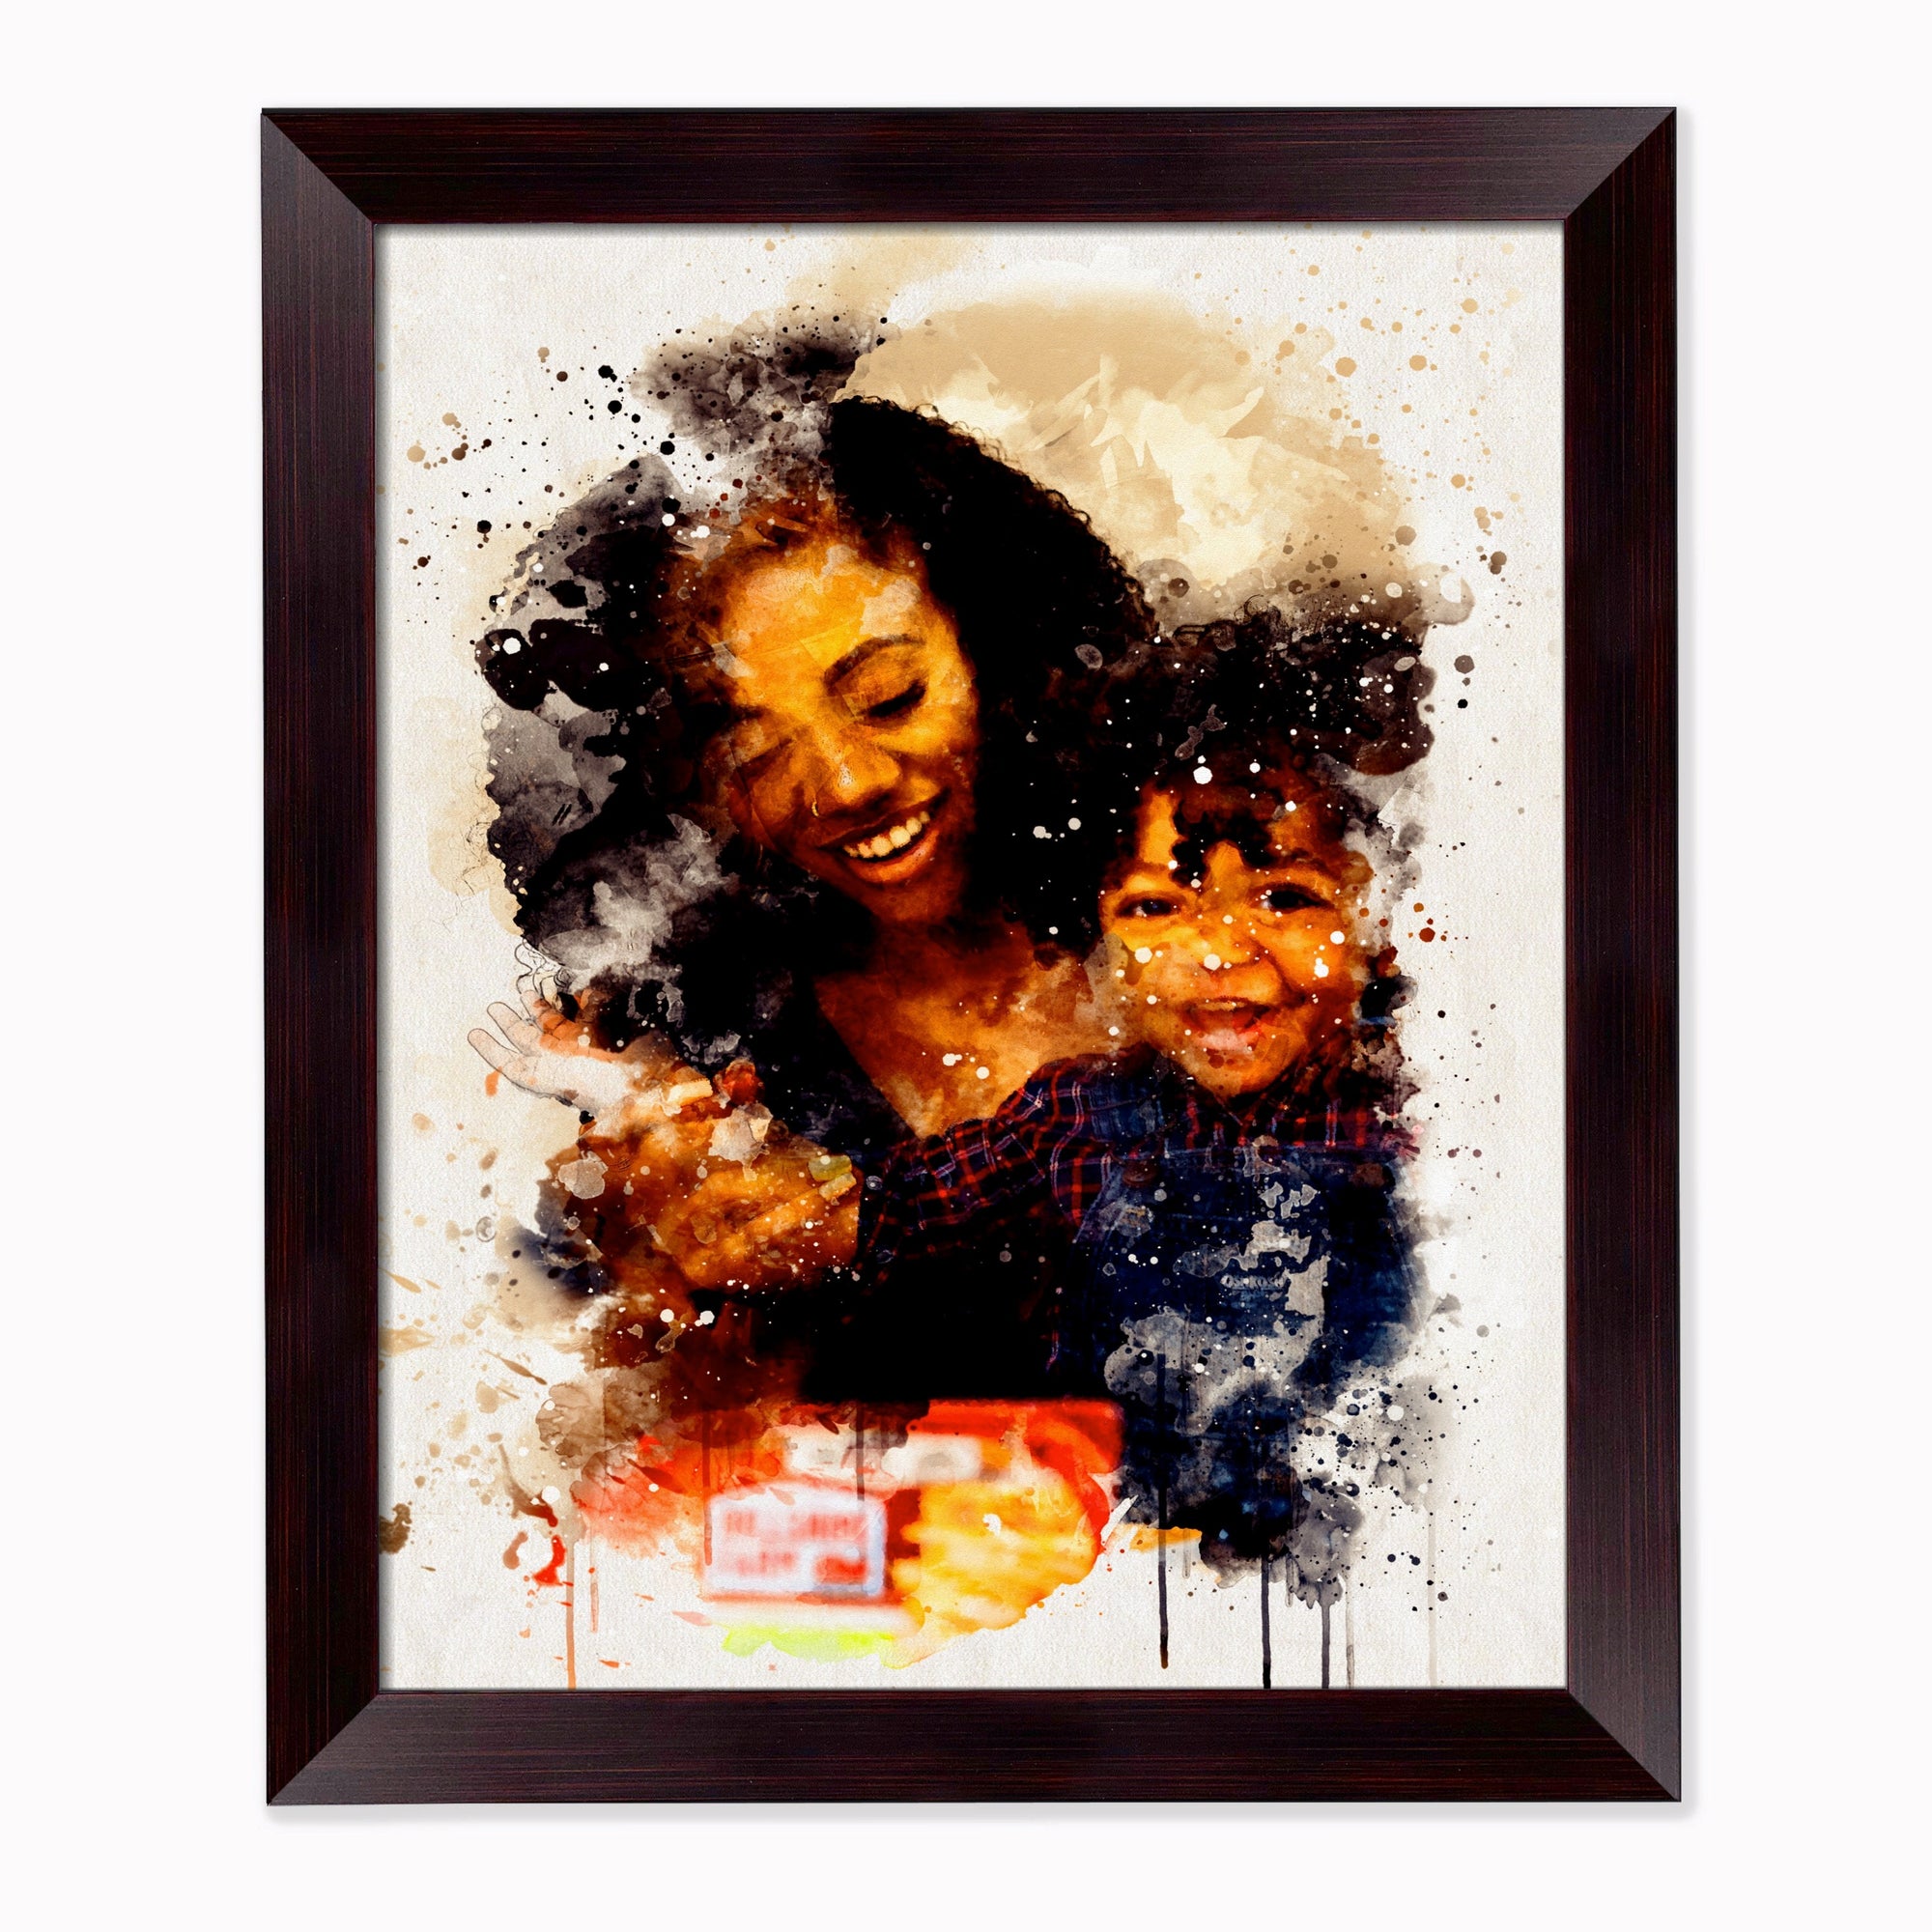 Christmas Gift for Mom From Daughter and Son Custom Photo Canvas